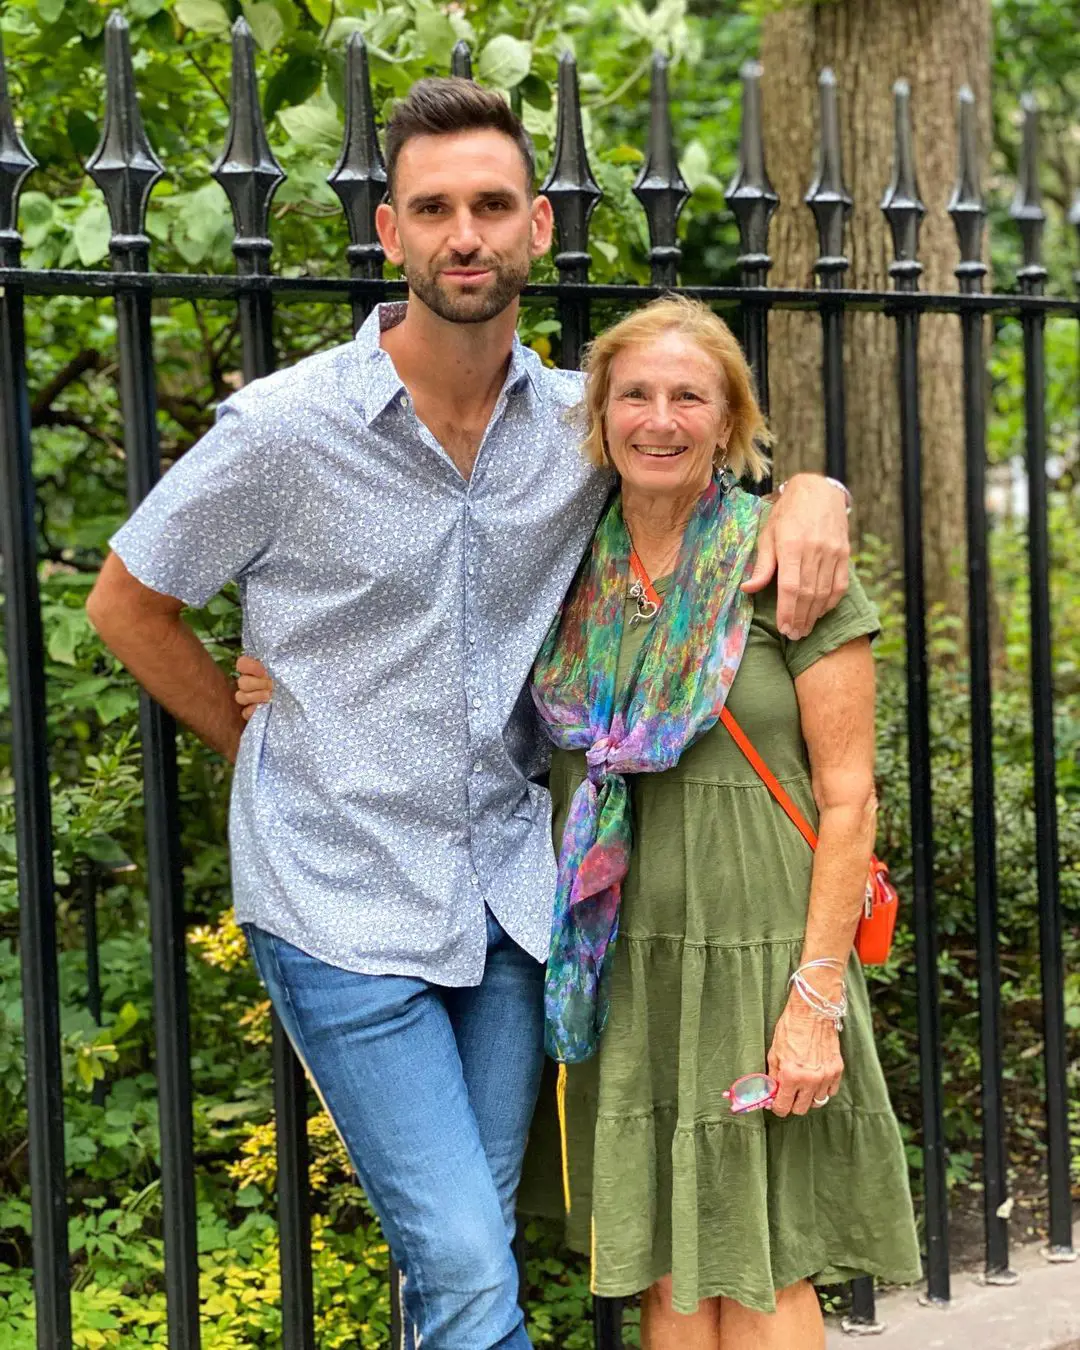 Carl having a quality time with his mother in Gramercy Park on April 8 2022